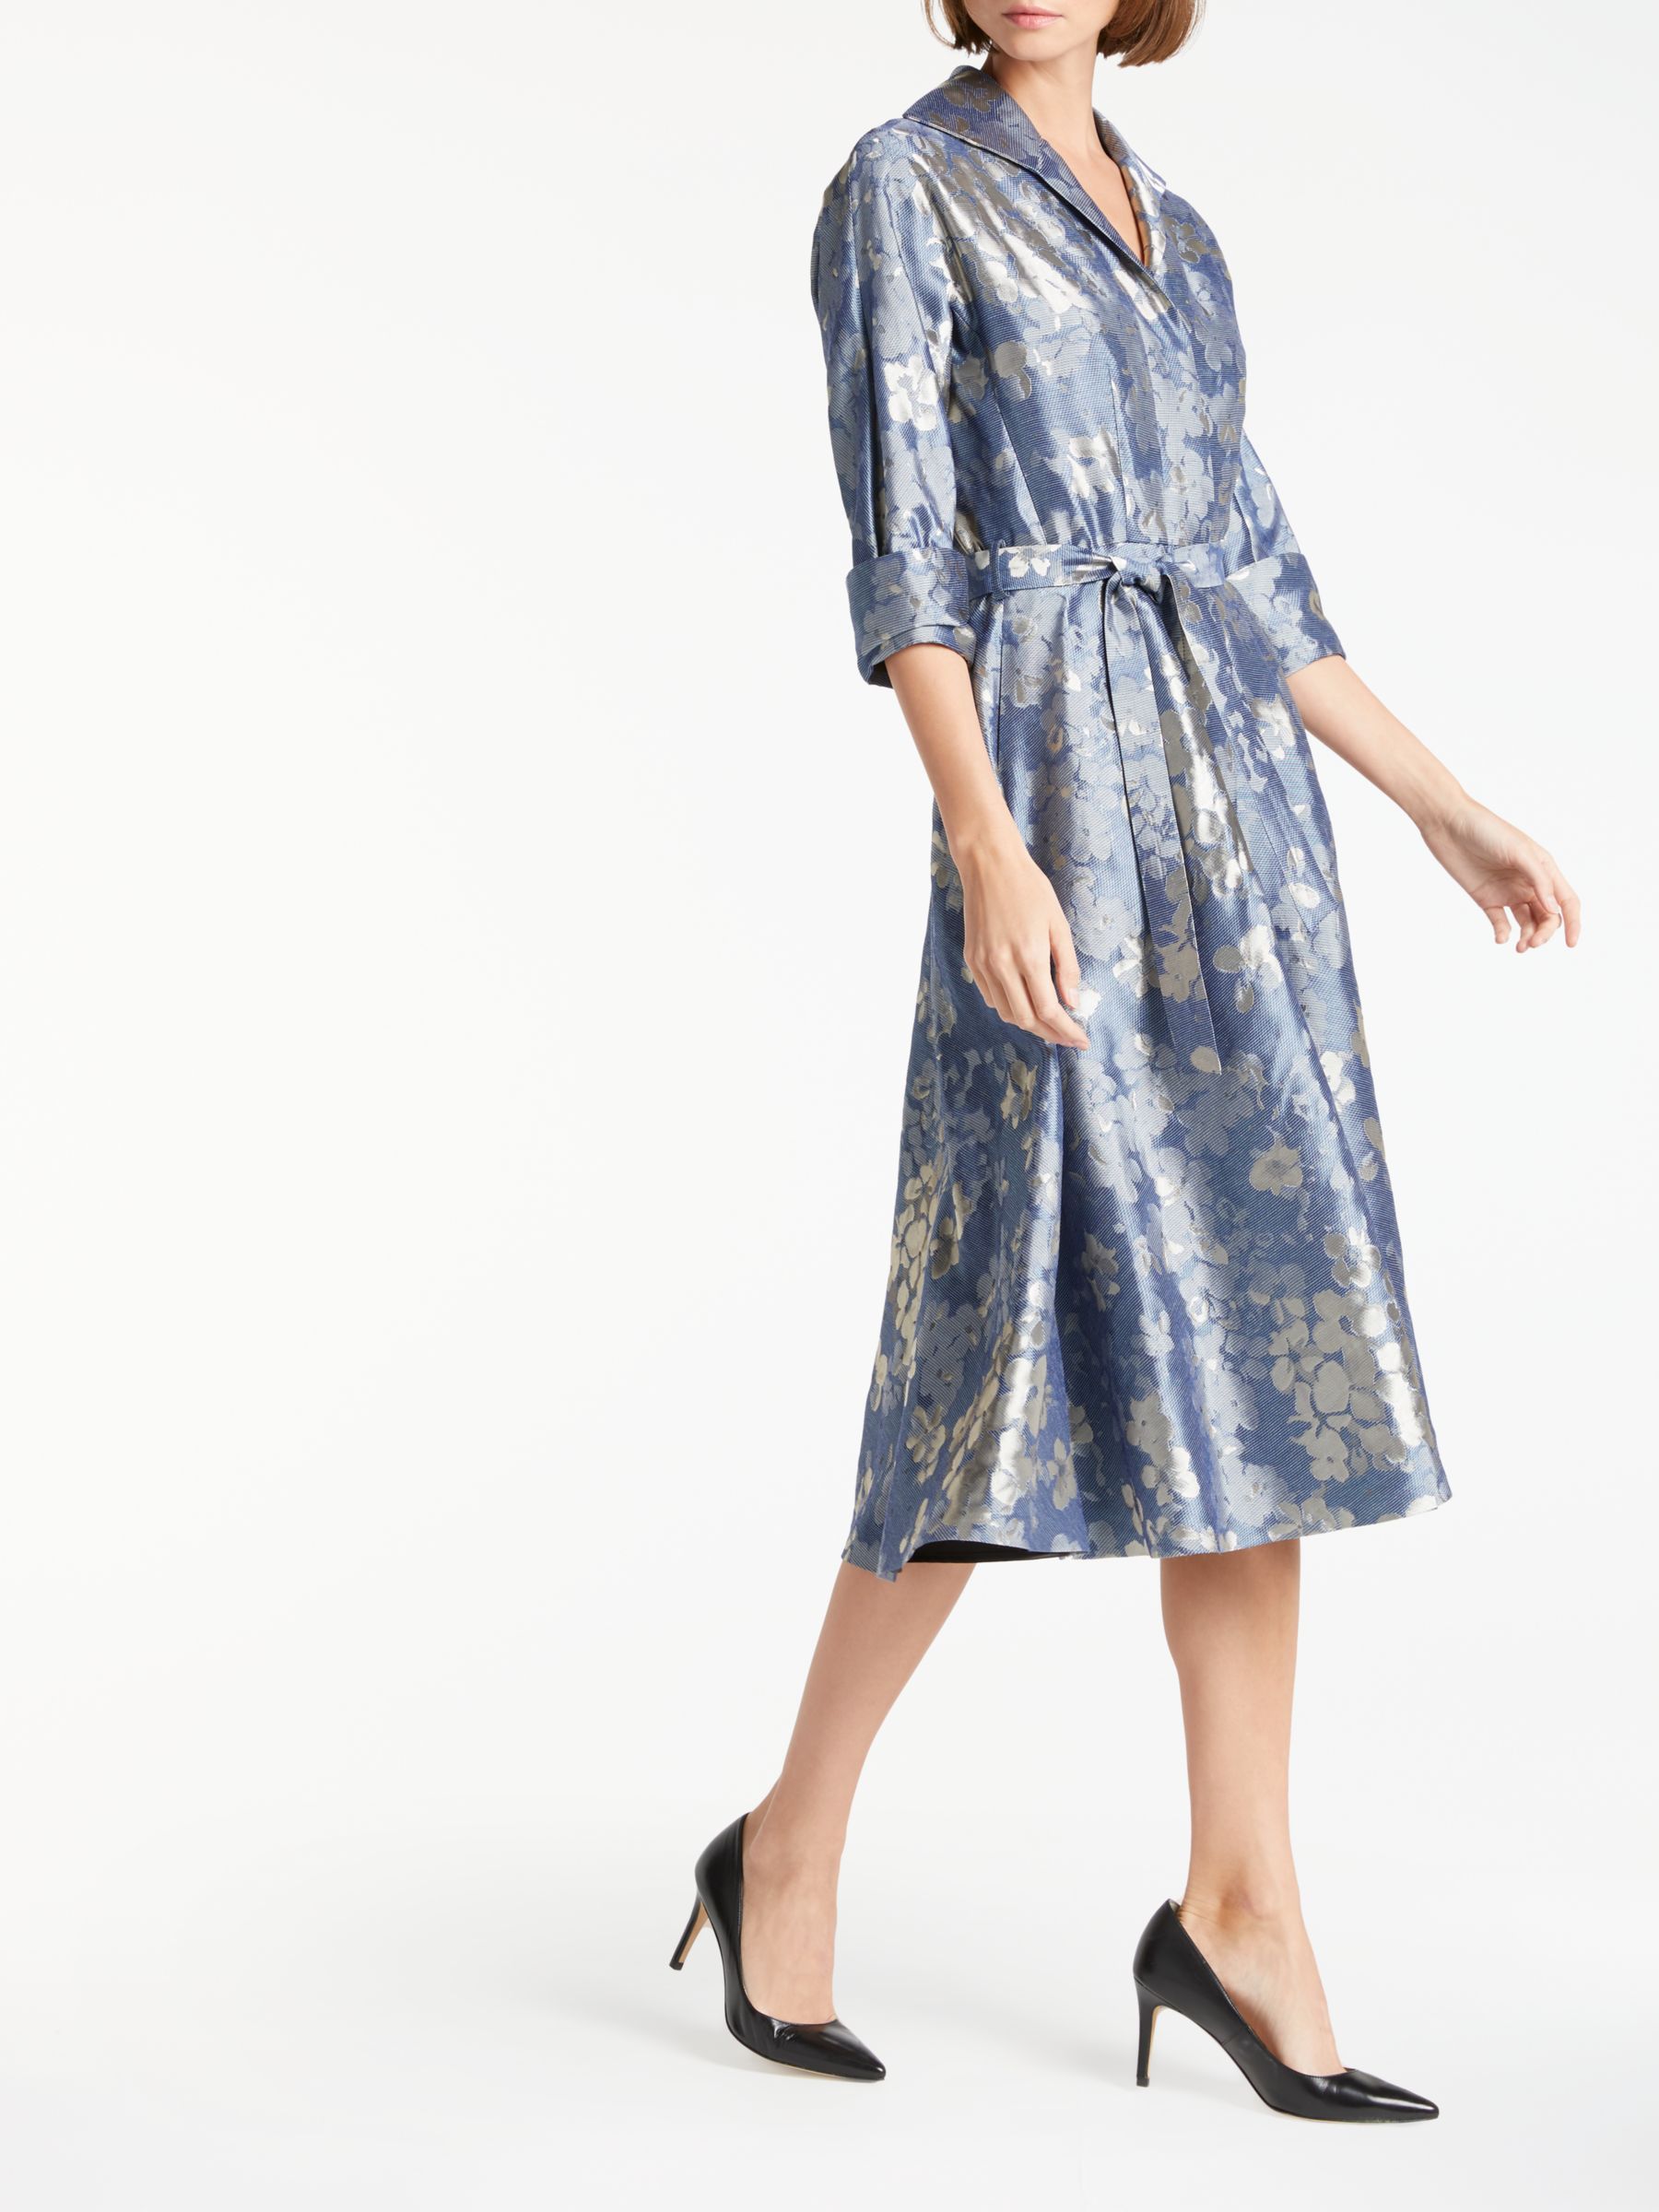 Bruce by Bruce Oldfield Floral Jacquard Dress, Blue at John Lewis ...